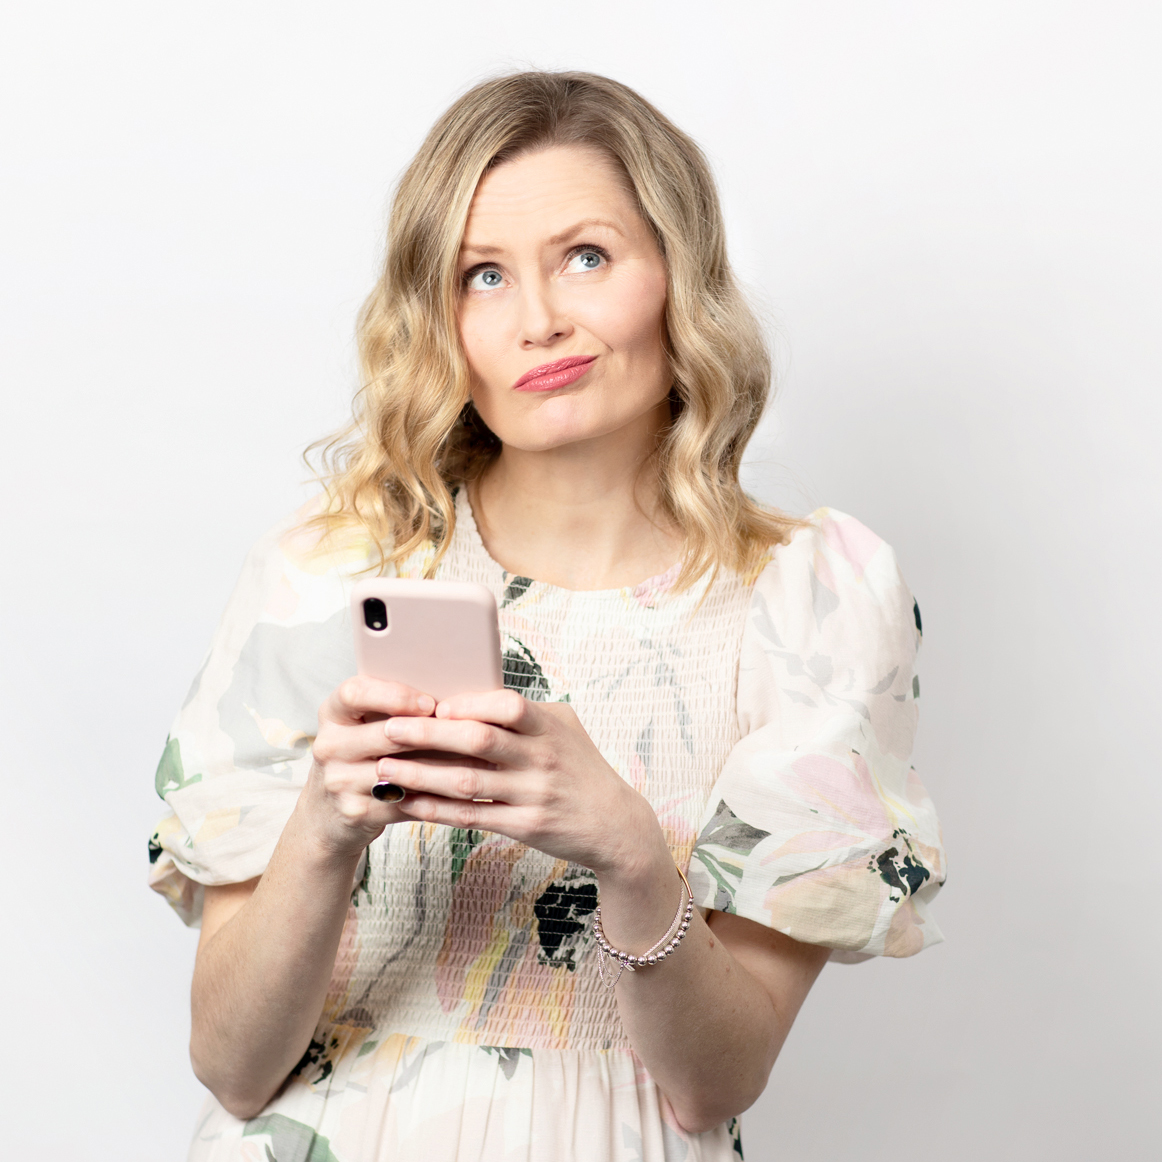 Woman holding mobile phone with quizzical look on face